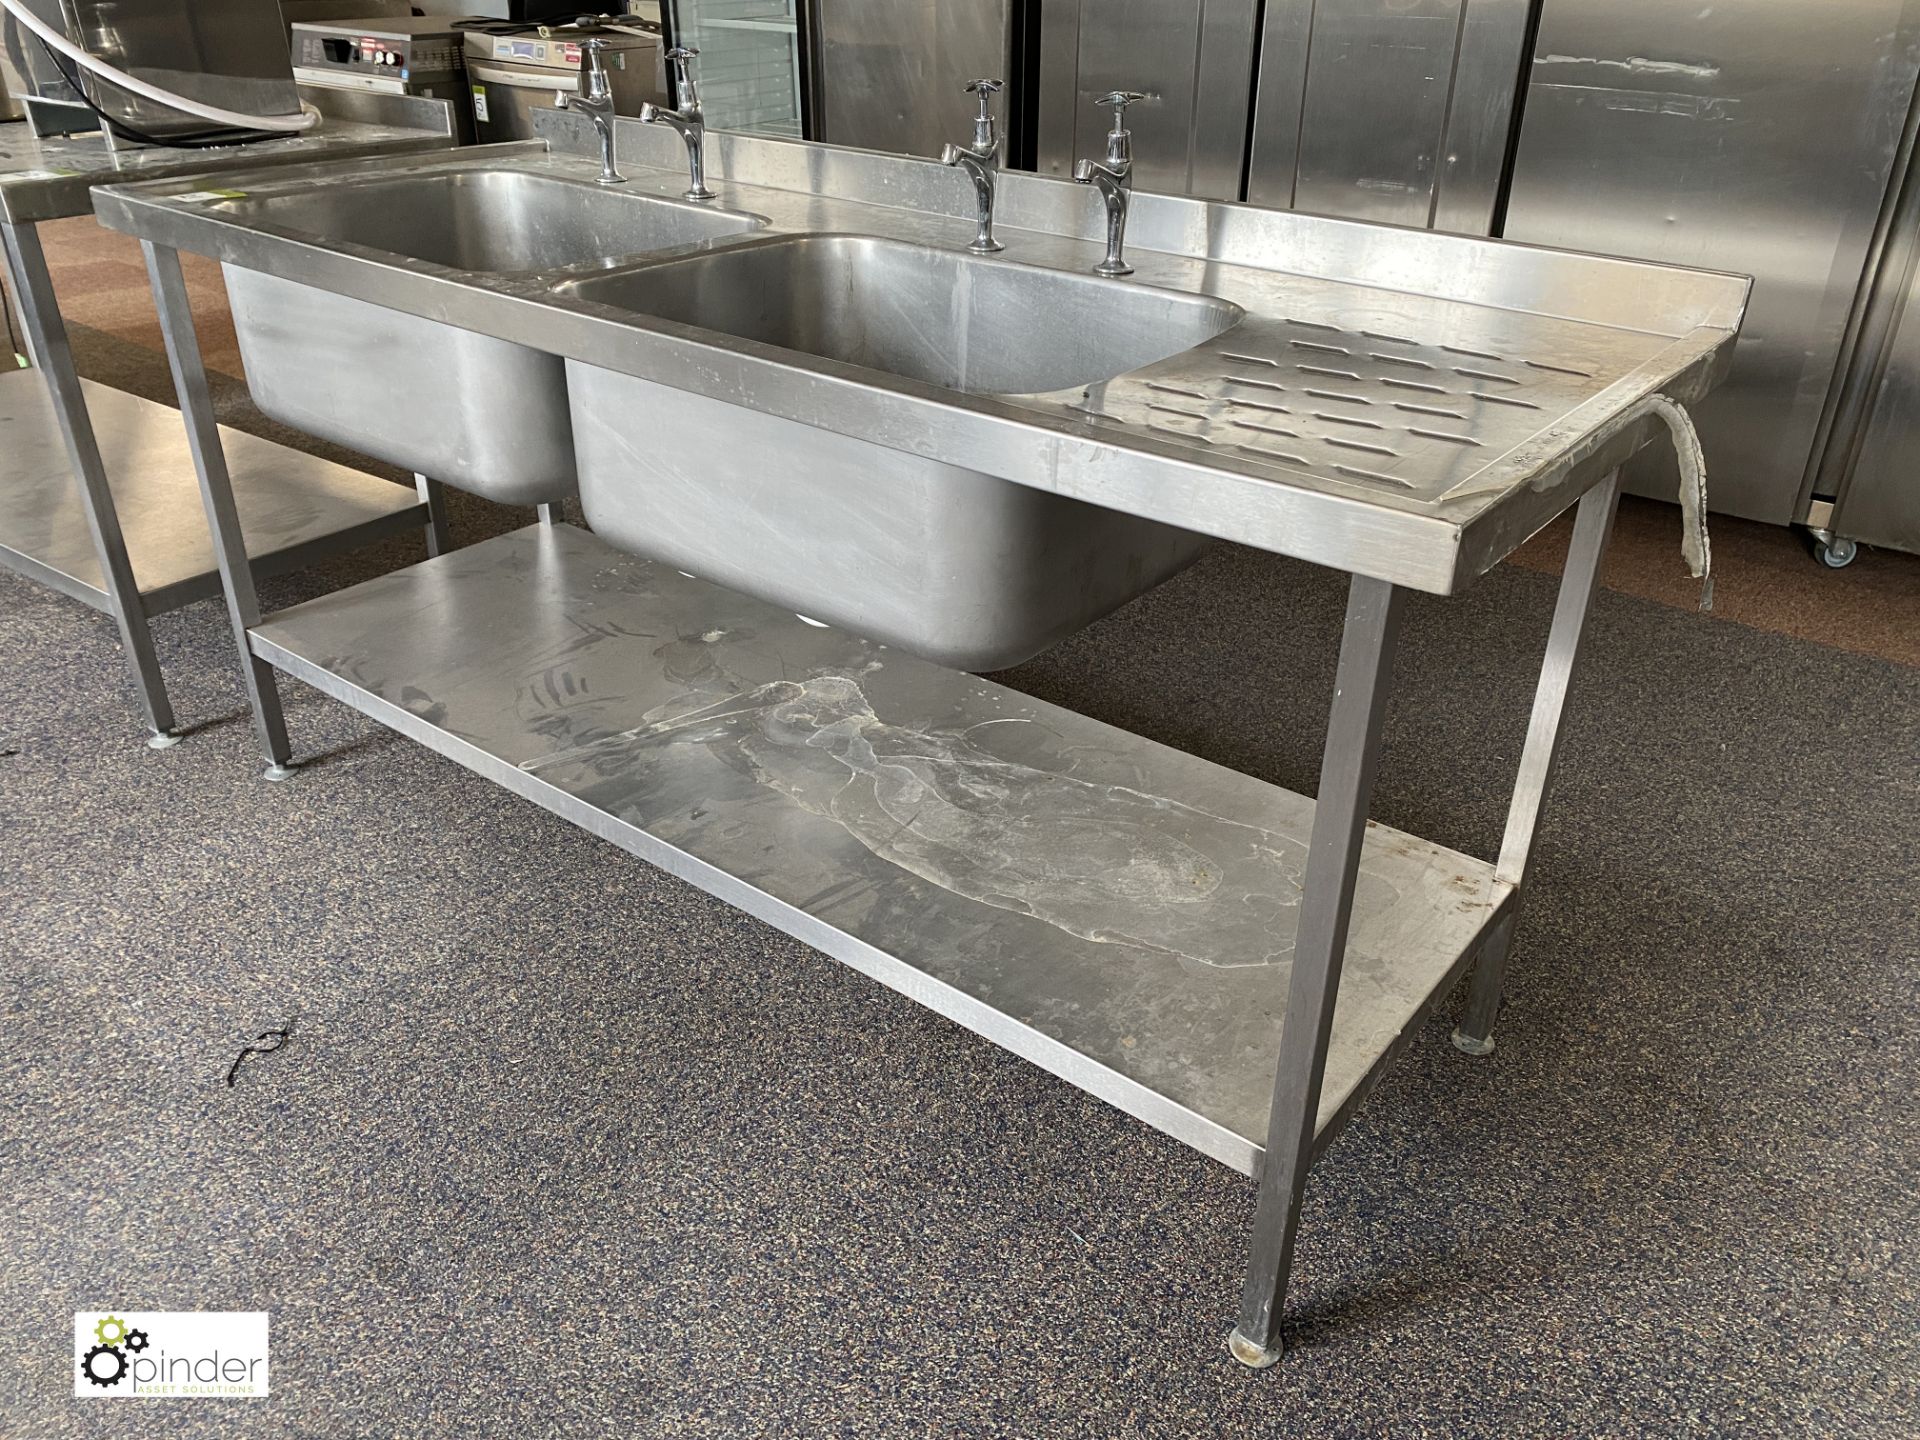 Stainless steel twin bowl Sink, 1800mm x 700mm x 840mm, with right hand drainer and under shelf - Image 3 of 3